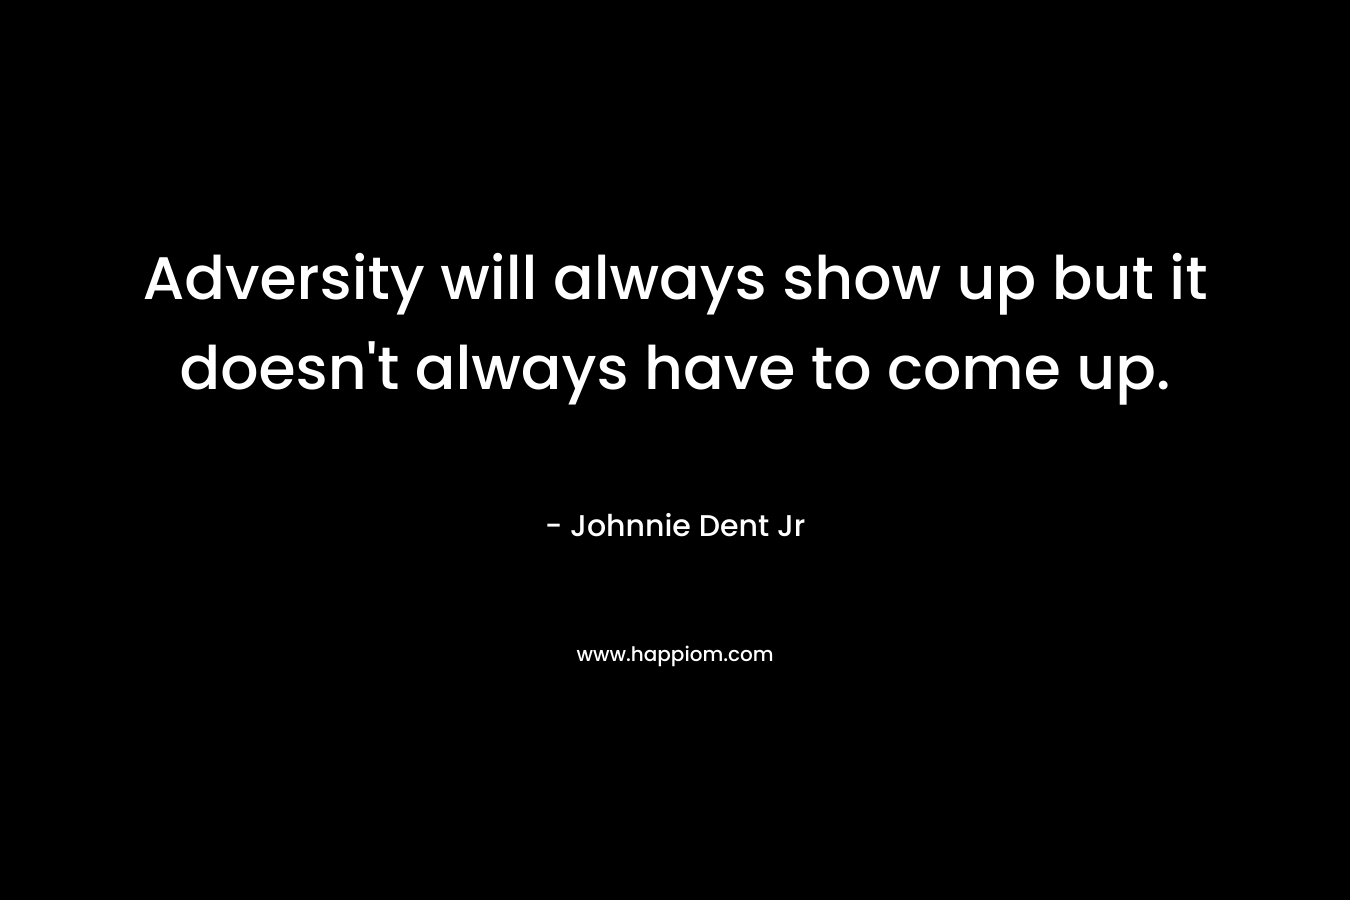 Adversity will always show up but it doesn’t always have to come up. – Johnnie Dent Jr